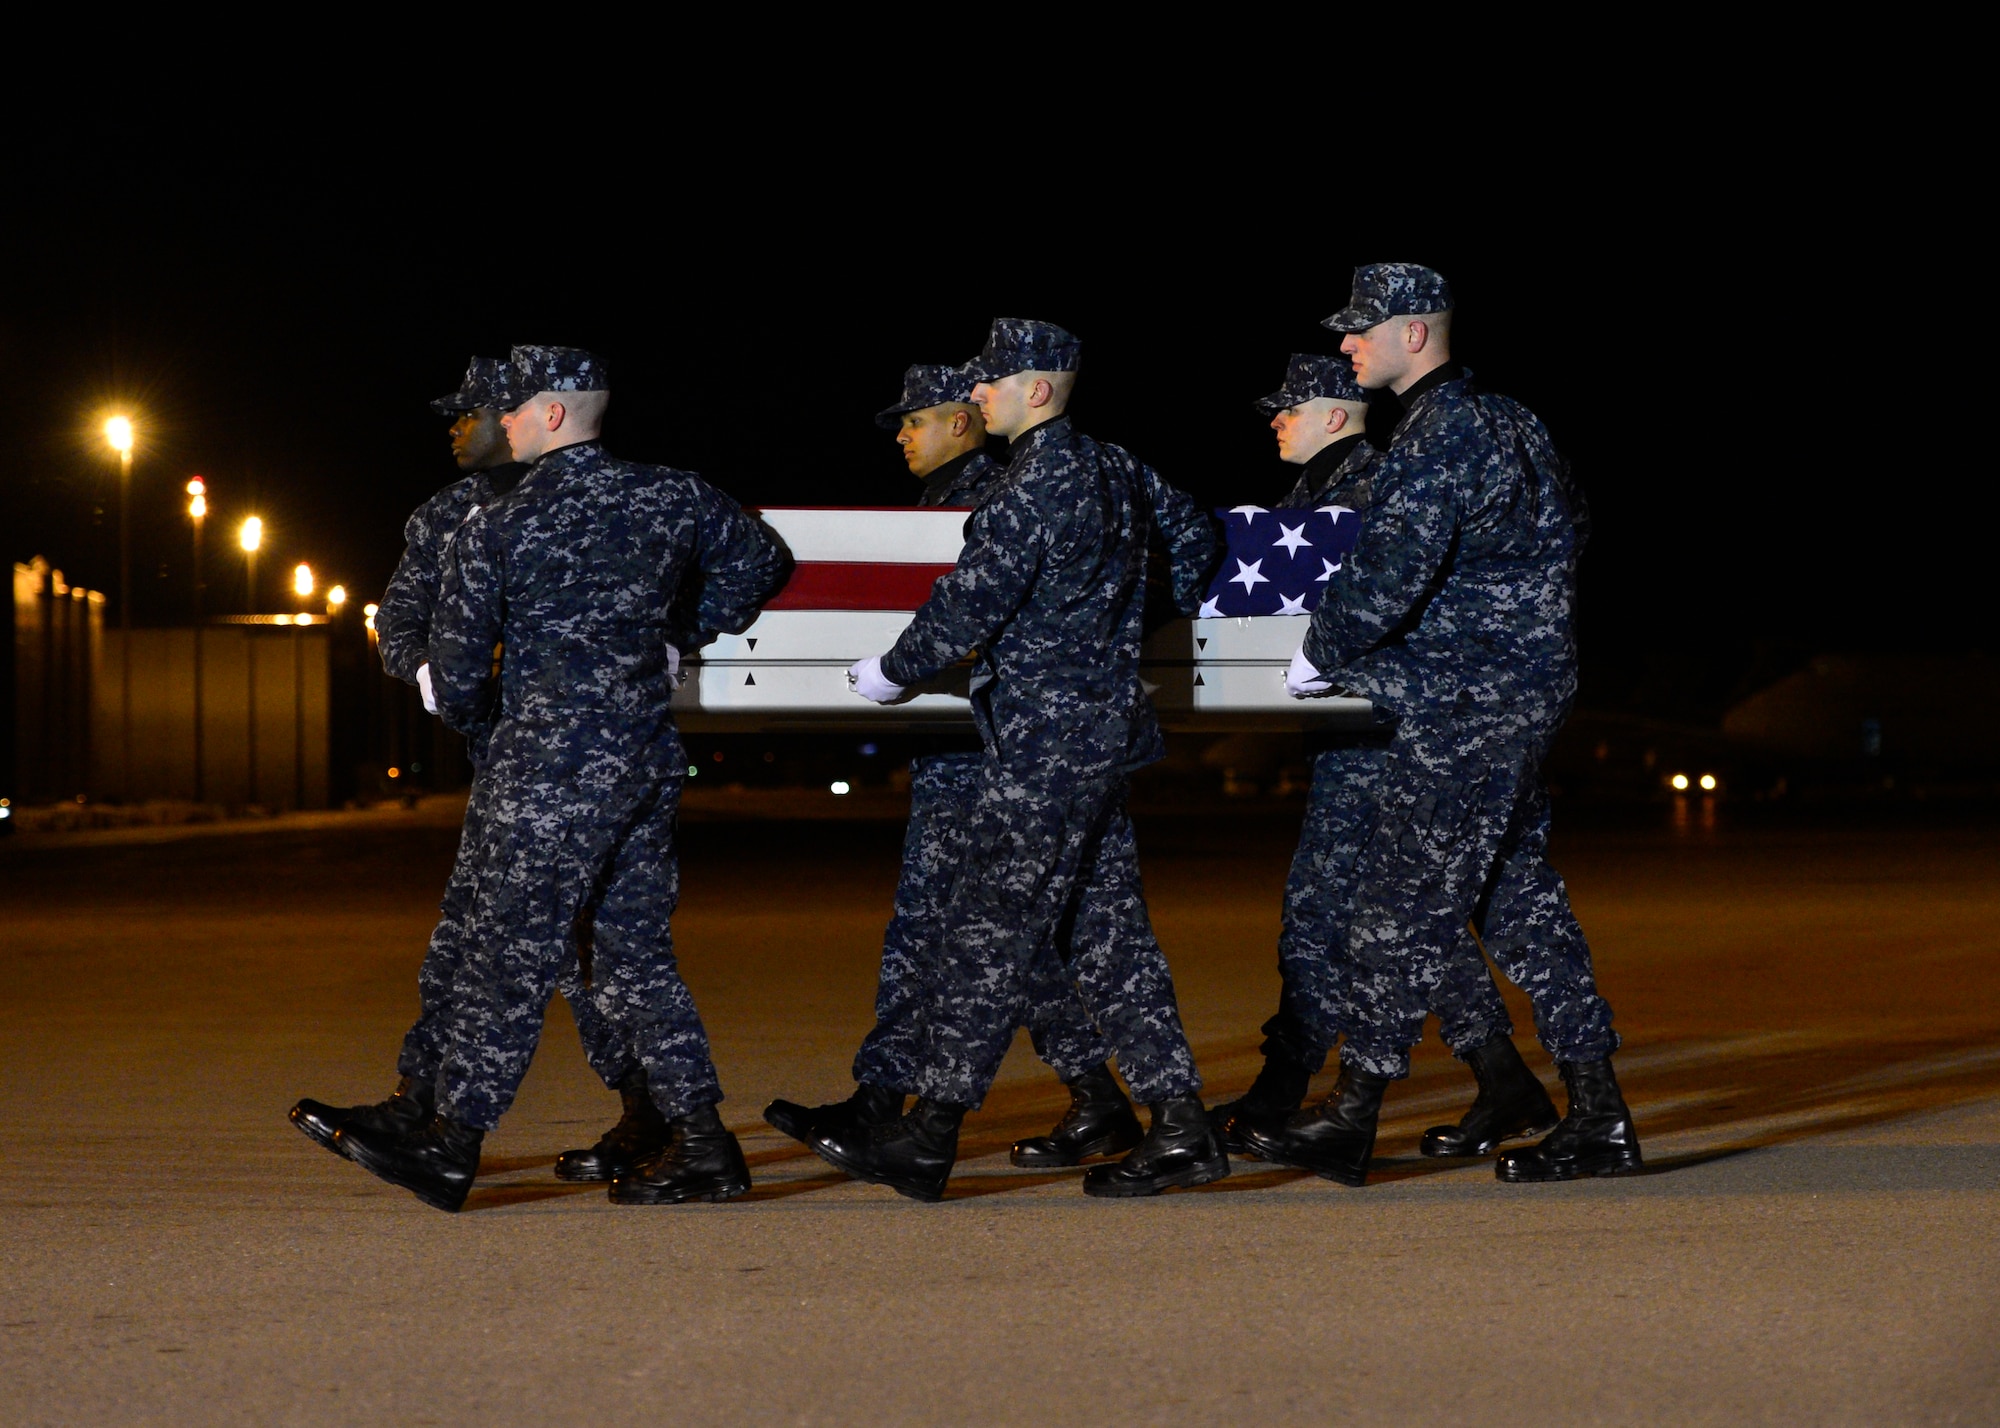 A U.S. Navy carry team transfers the remains of U.S. Navy civilian Blane D. Bussell, a native of Virginia, during a dignified transfer Jan. 29, 2016, at Dover Air Force Base, Del. Mr. Bussell was assigned to Naval Support Activity, Bahrain. (U.S. Air Force photo/Senior Airman Zachary Cacicia)